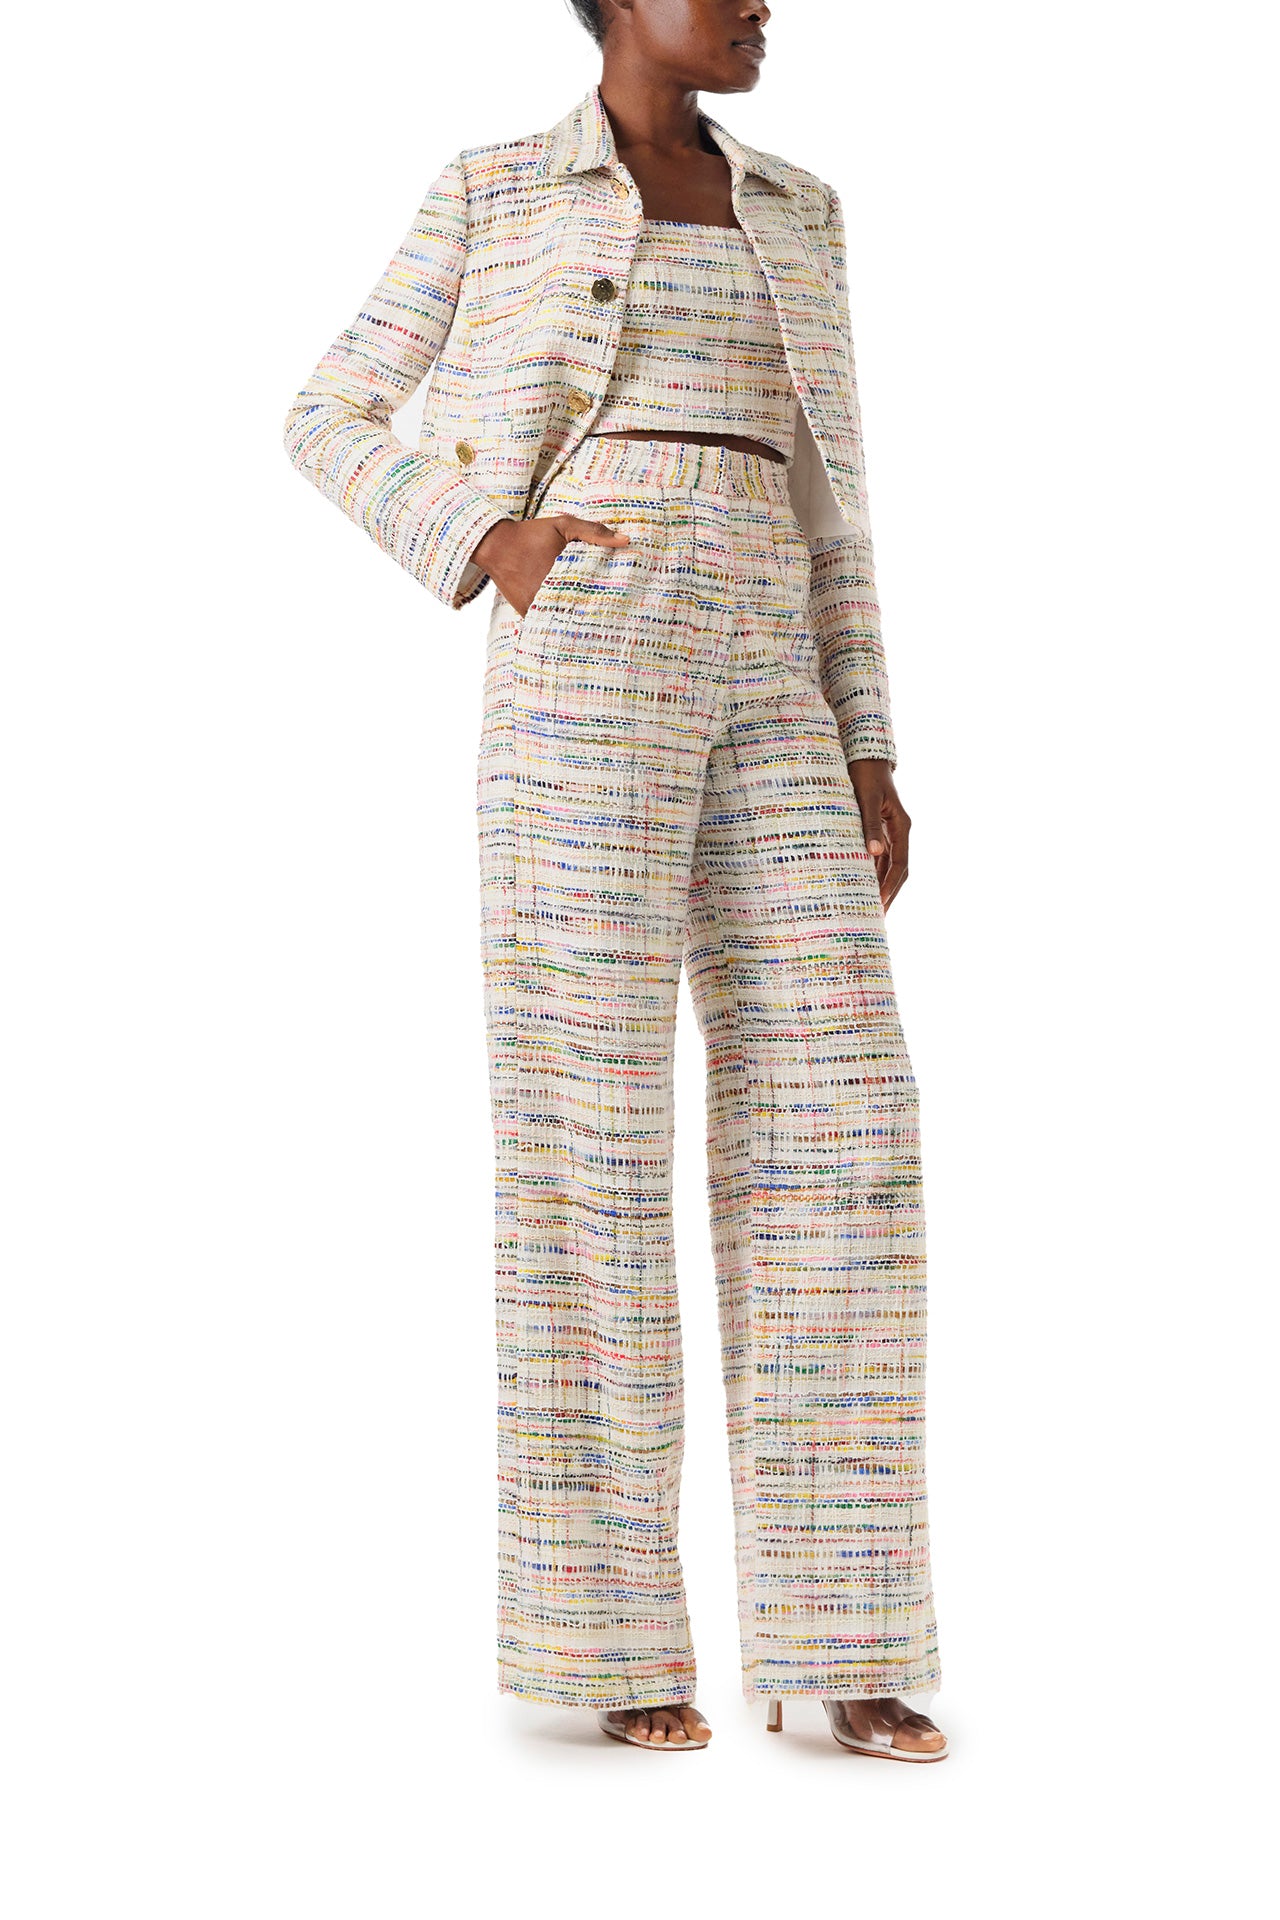 Monique Lhuillier Spring 2024 high waisted trouser with pockets in multi color tweed - right side.